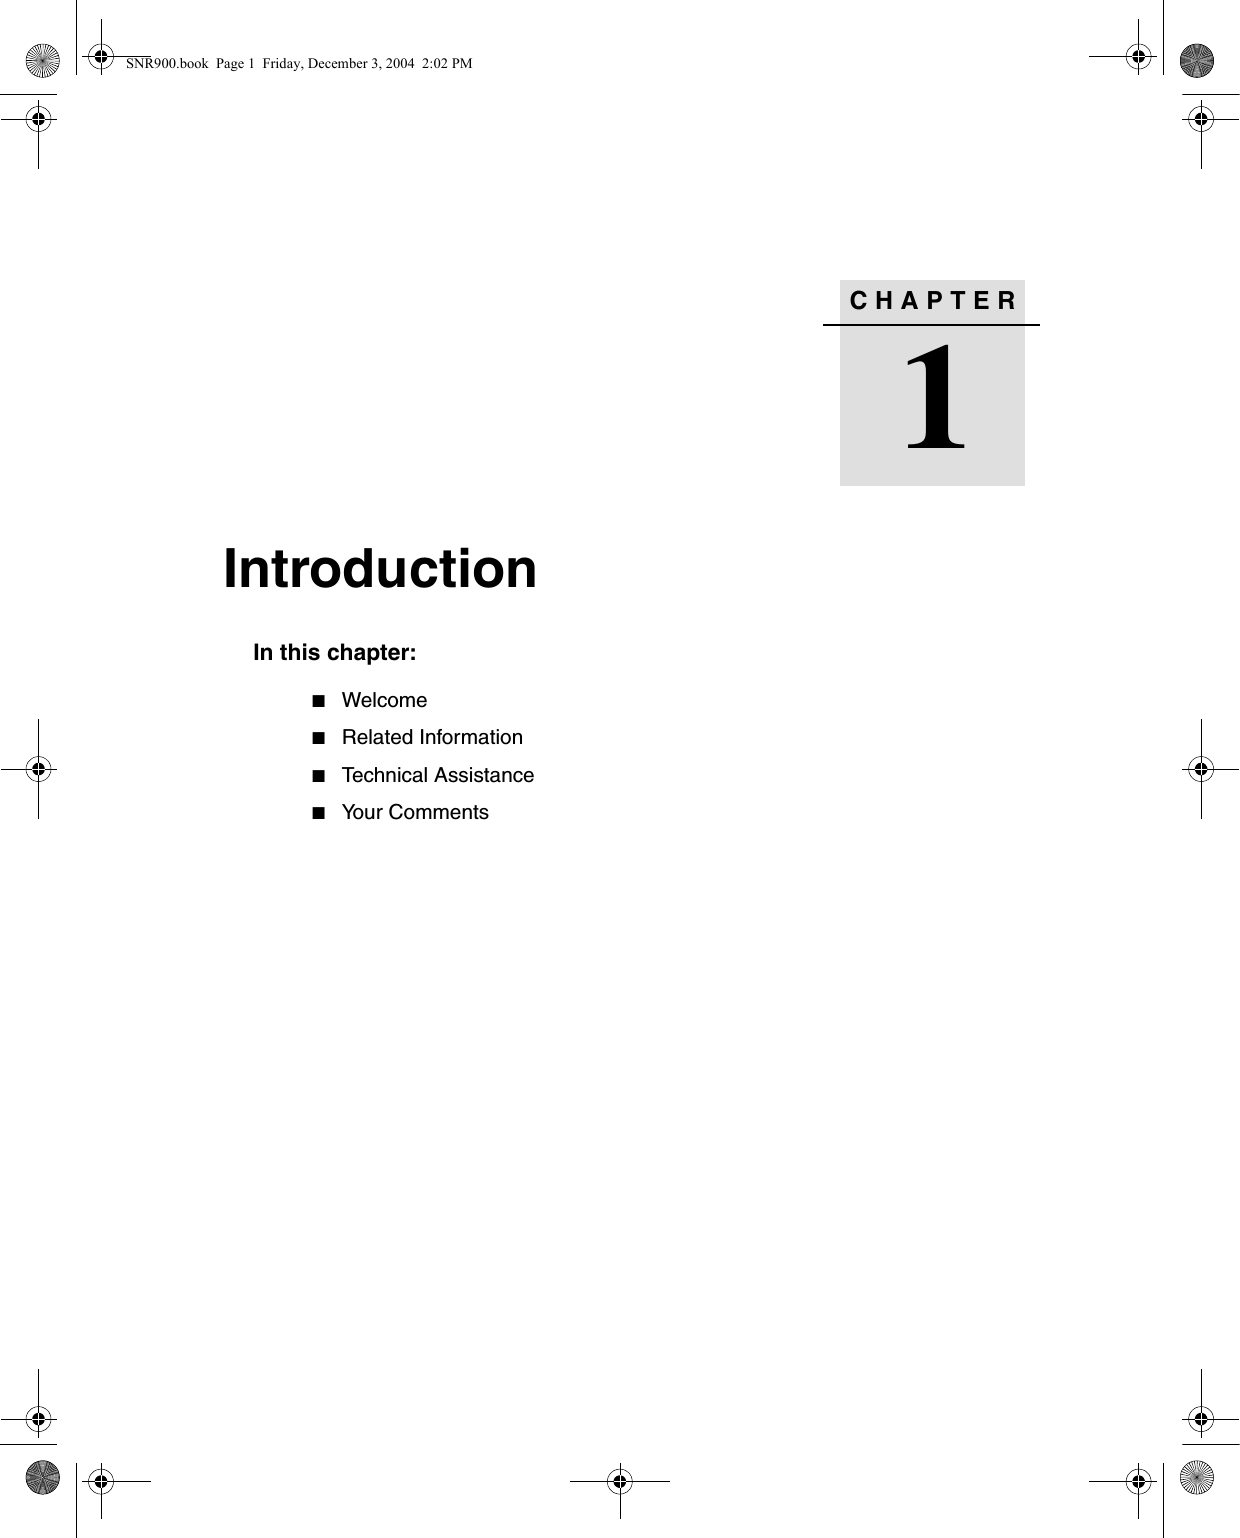 CHAPTER1Introduction 1In this chapter:QWelcomeQRelated InformationQTechnical AssistanceQYour CommentsSNR900.book  Page 1  Friday, December 3, 2004  2:02 PM